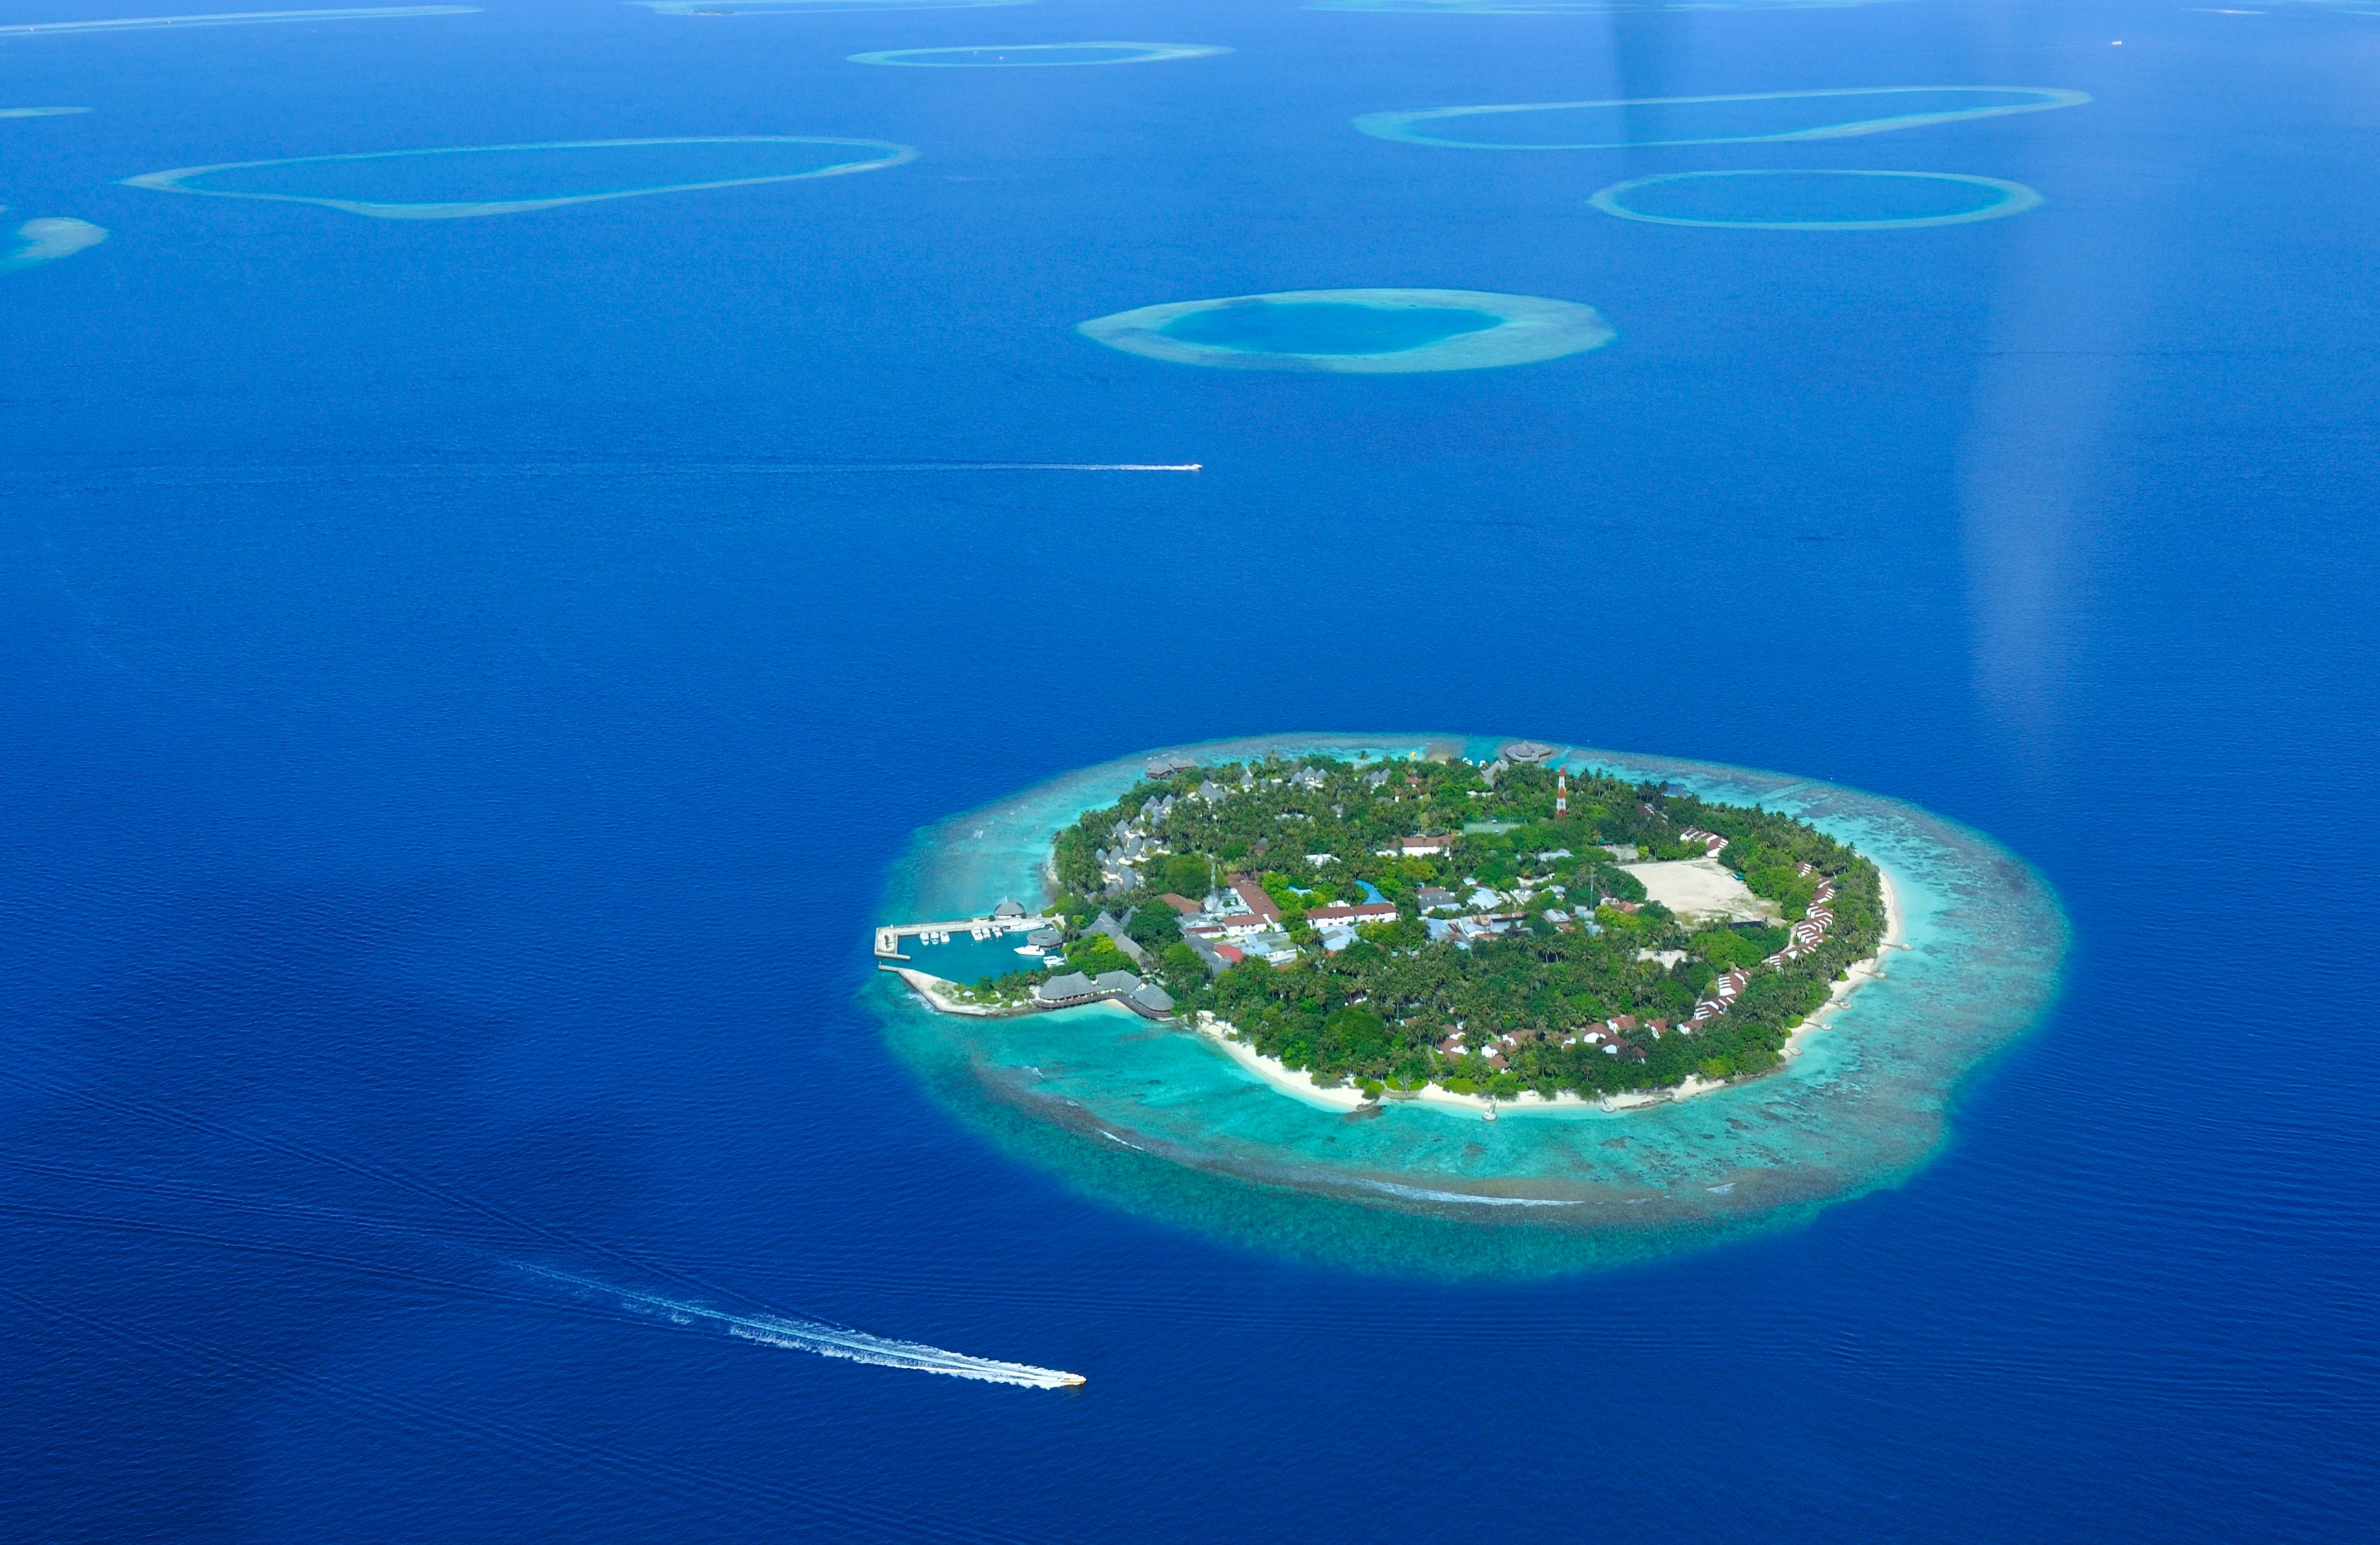 An aerial view of Bandos Island Resort, one of the first to open in the Maldives 50 years ago, when the Indian Ocean island nation was a novel travel destination few had heard of. Photo: Getty Images